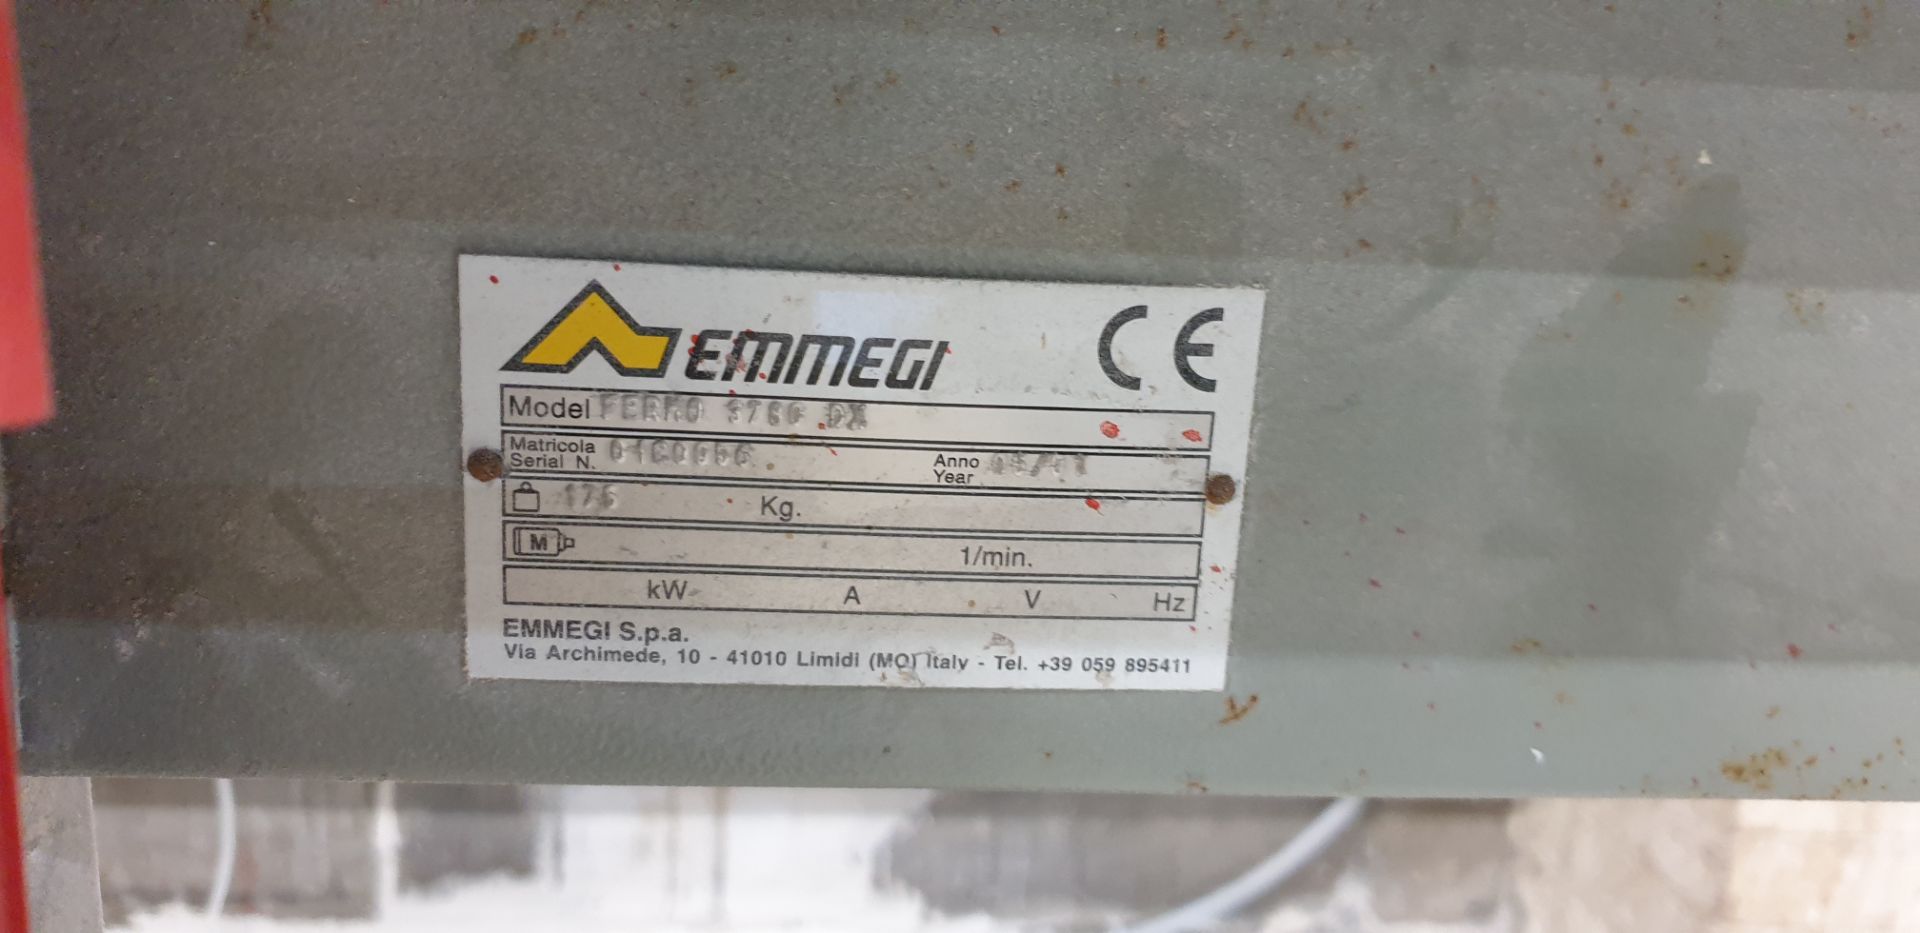 Emmegi, Ferro 3780 DX, Up Cut Saw With Roller Feed And Extraction , Serial Number: 0160056, Year of - Image 4 of 5